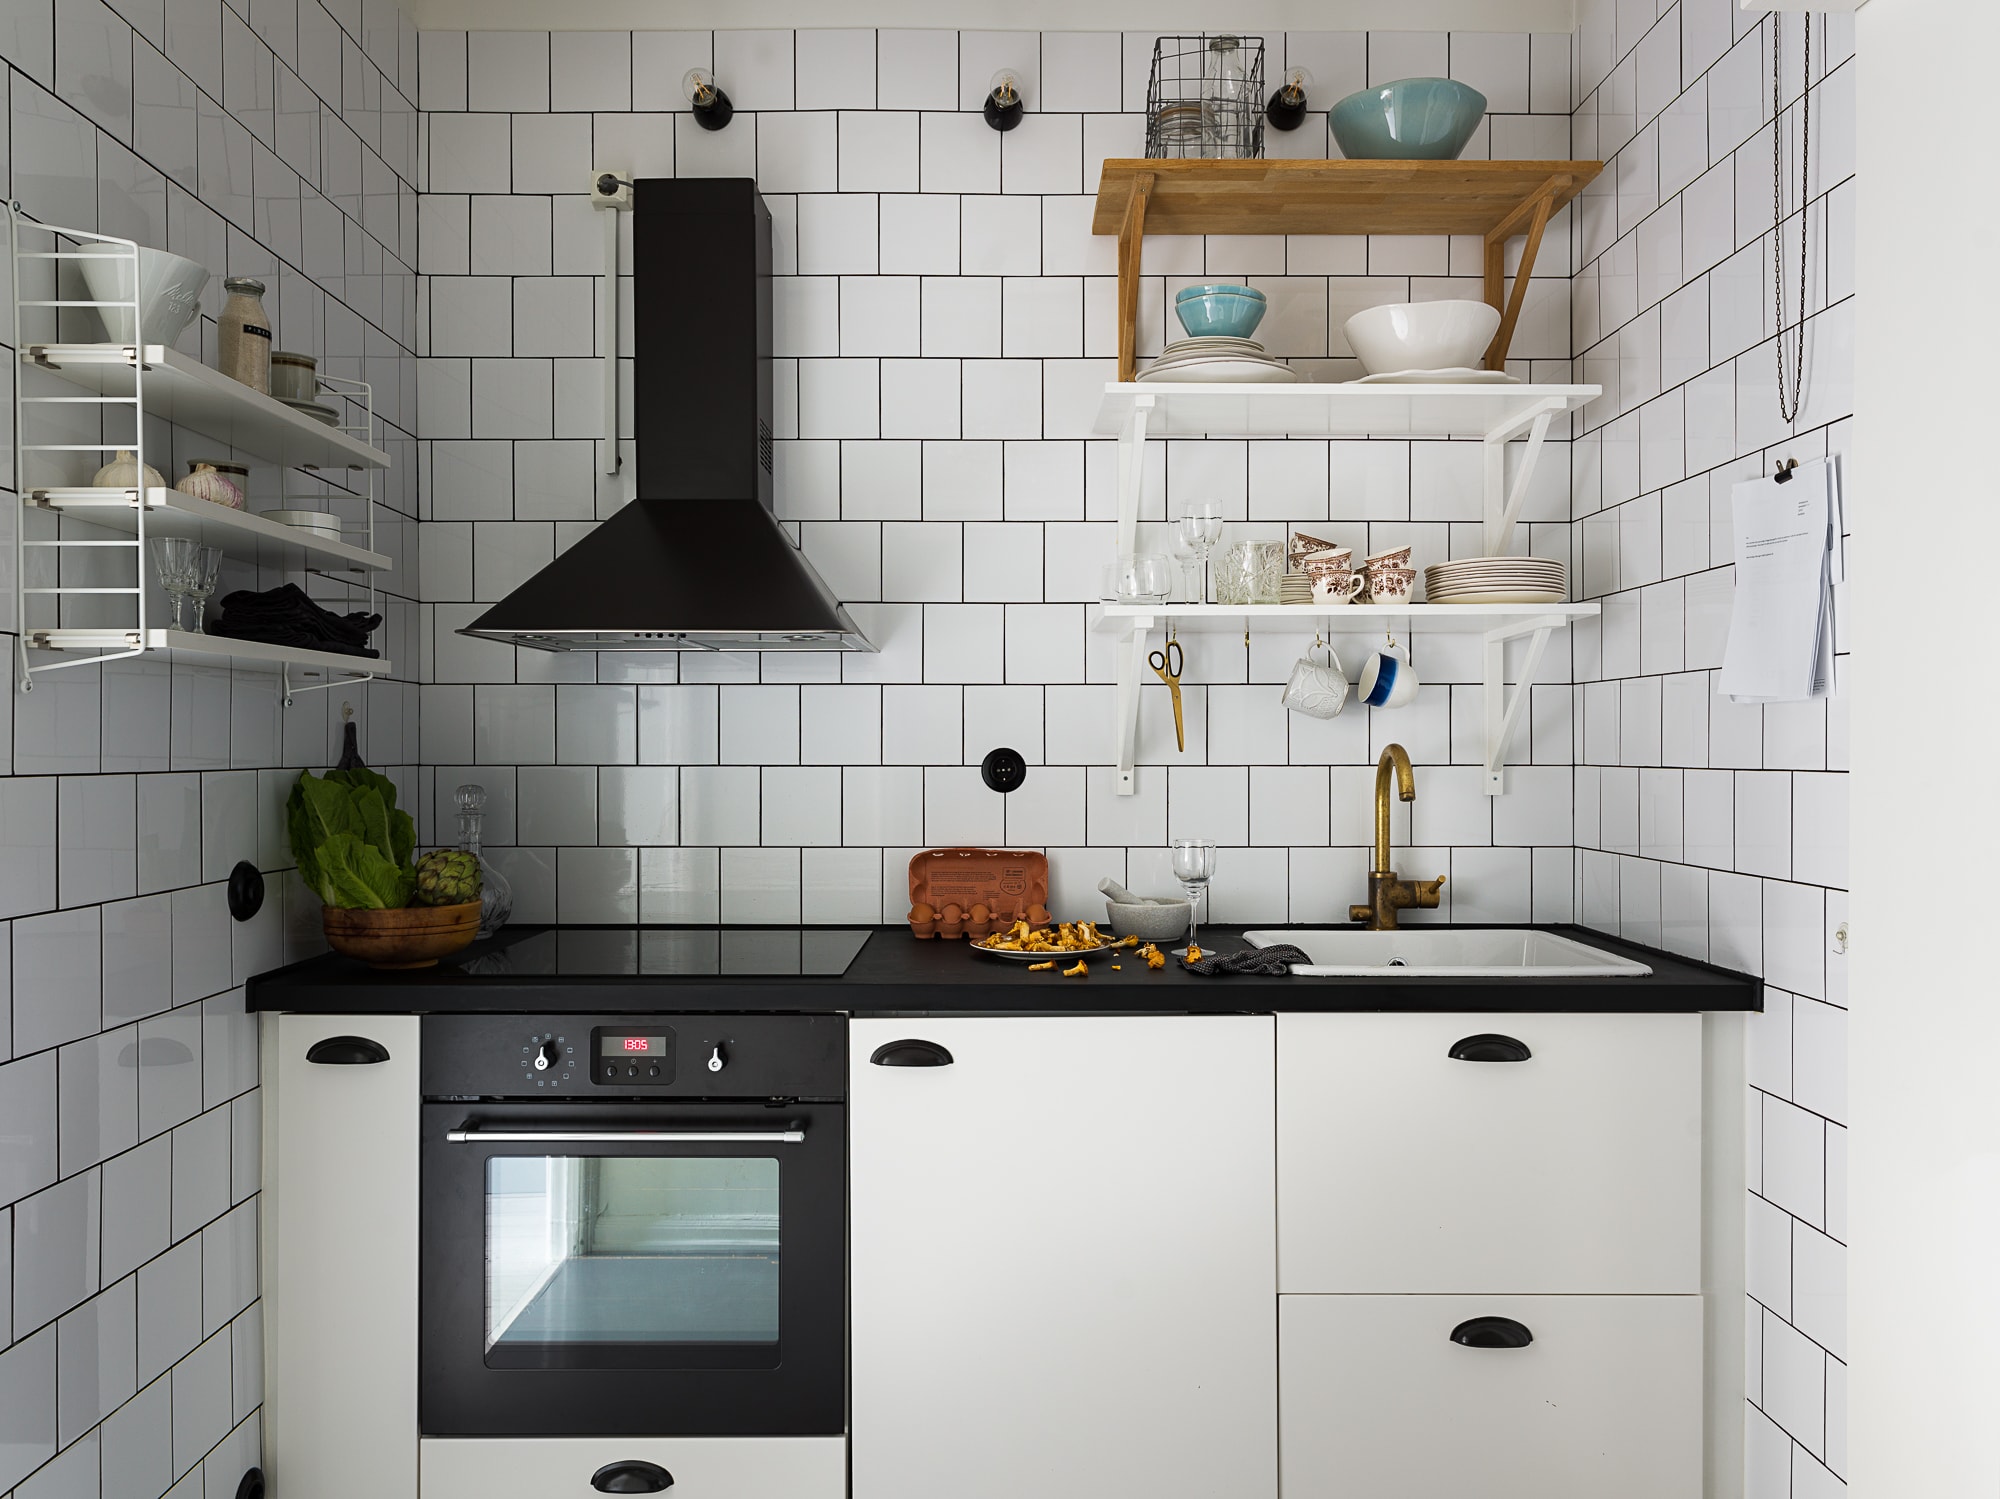 Space-Saving Ideas From a Compact Kitchen and Bath